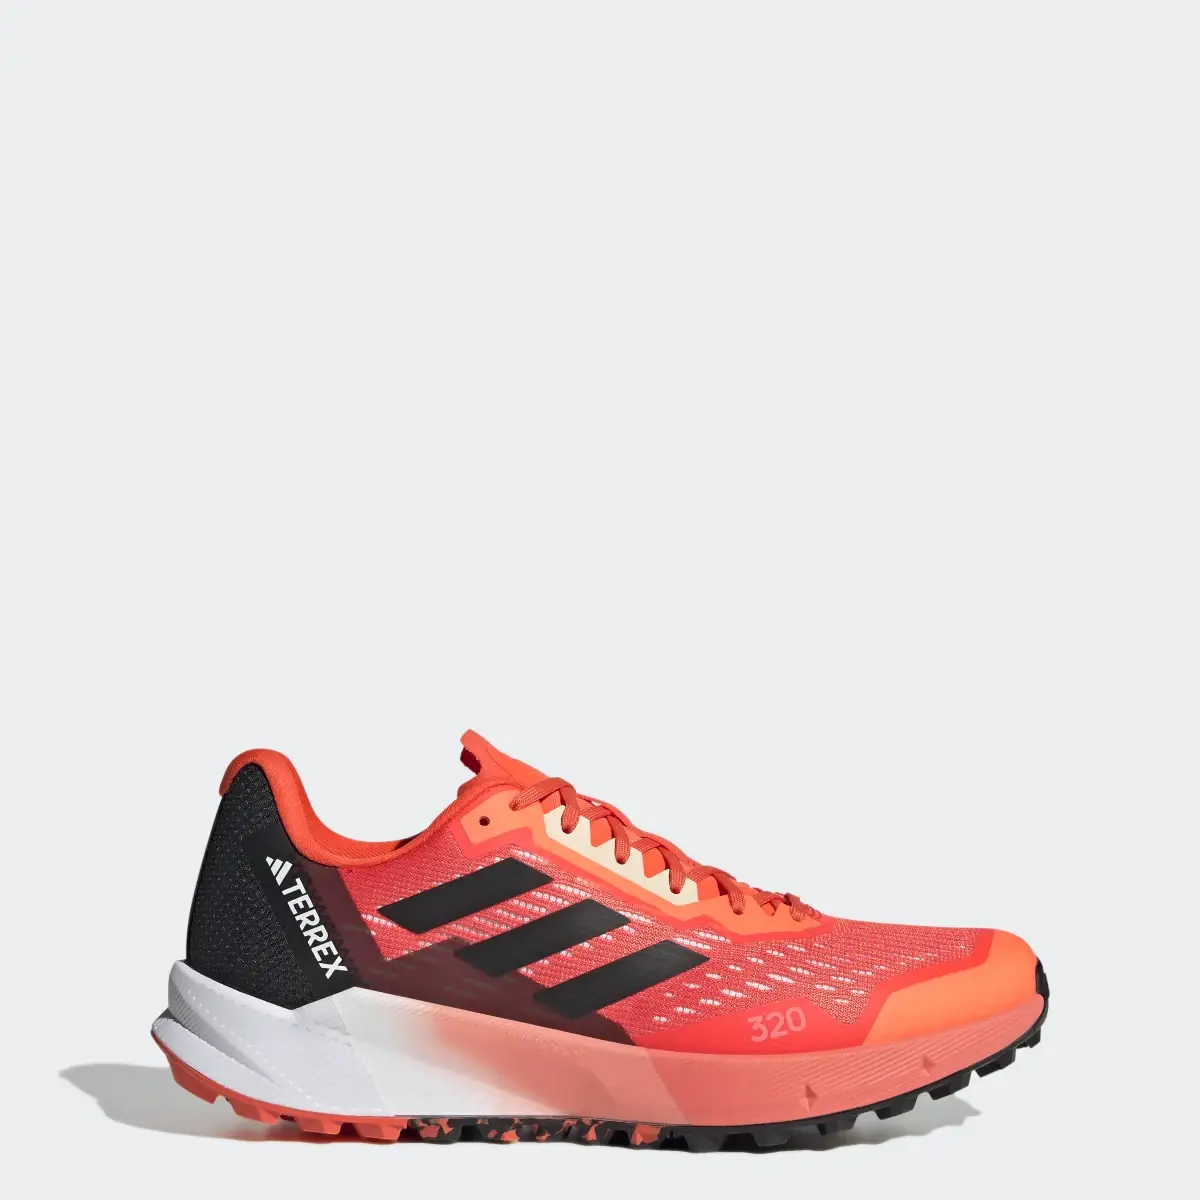 Adidas Terrex Agravic Flow 2.0 Trail Running Shoes. 1